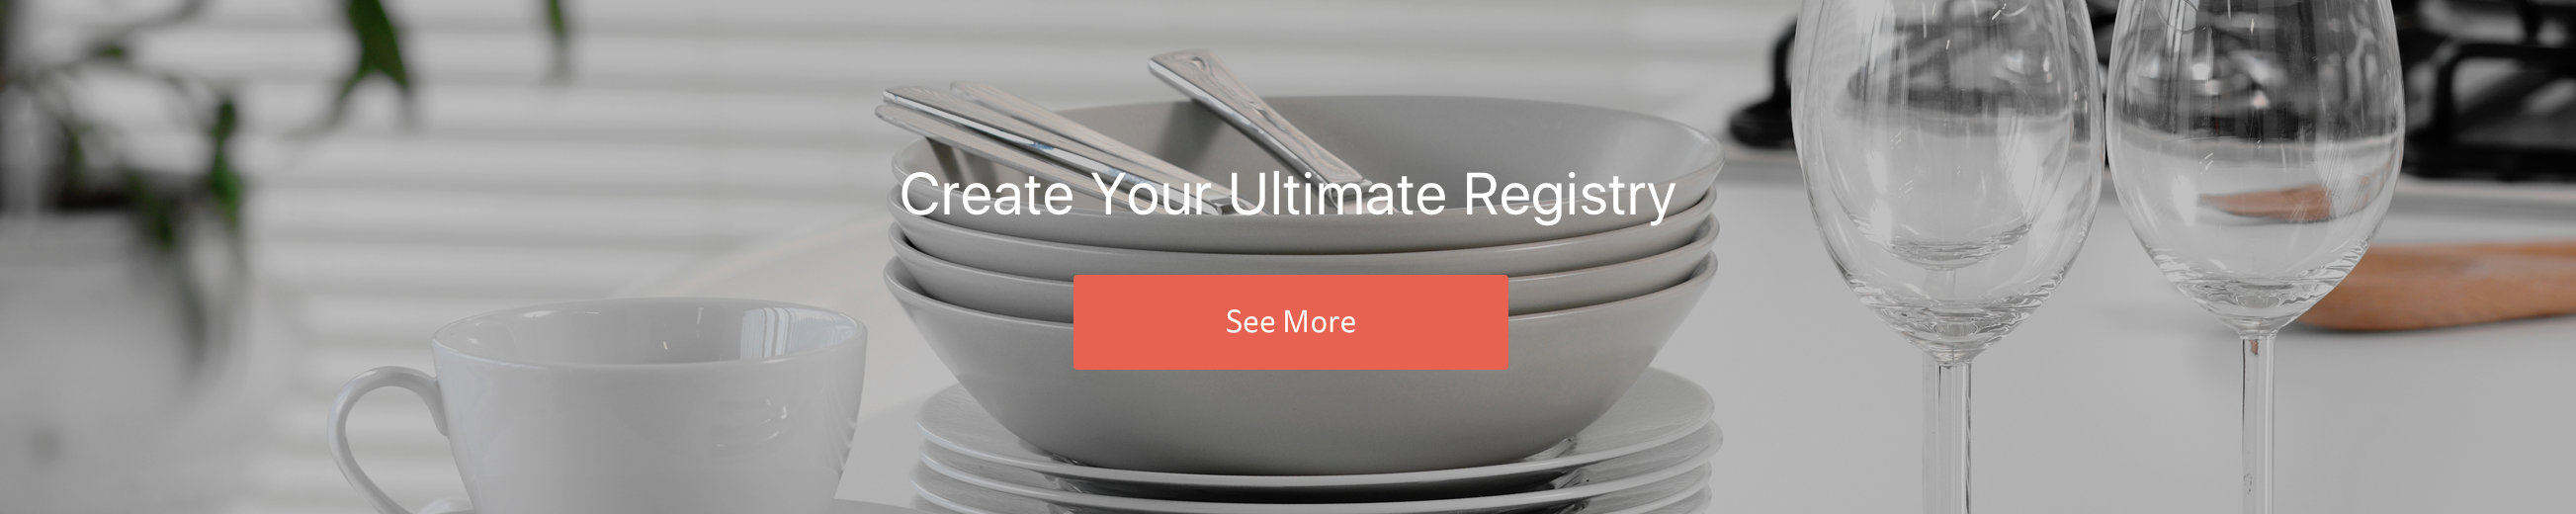 create your Ultimate Registry - See More